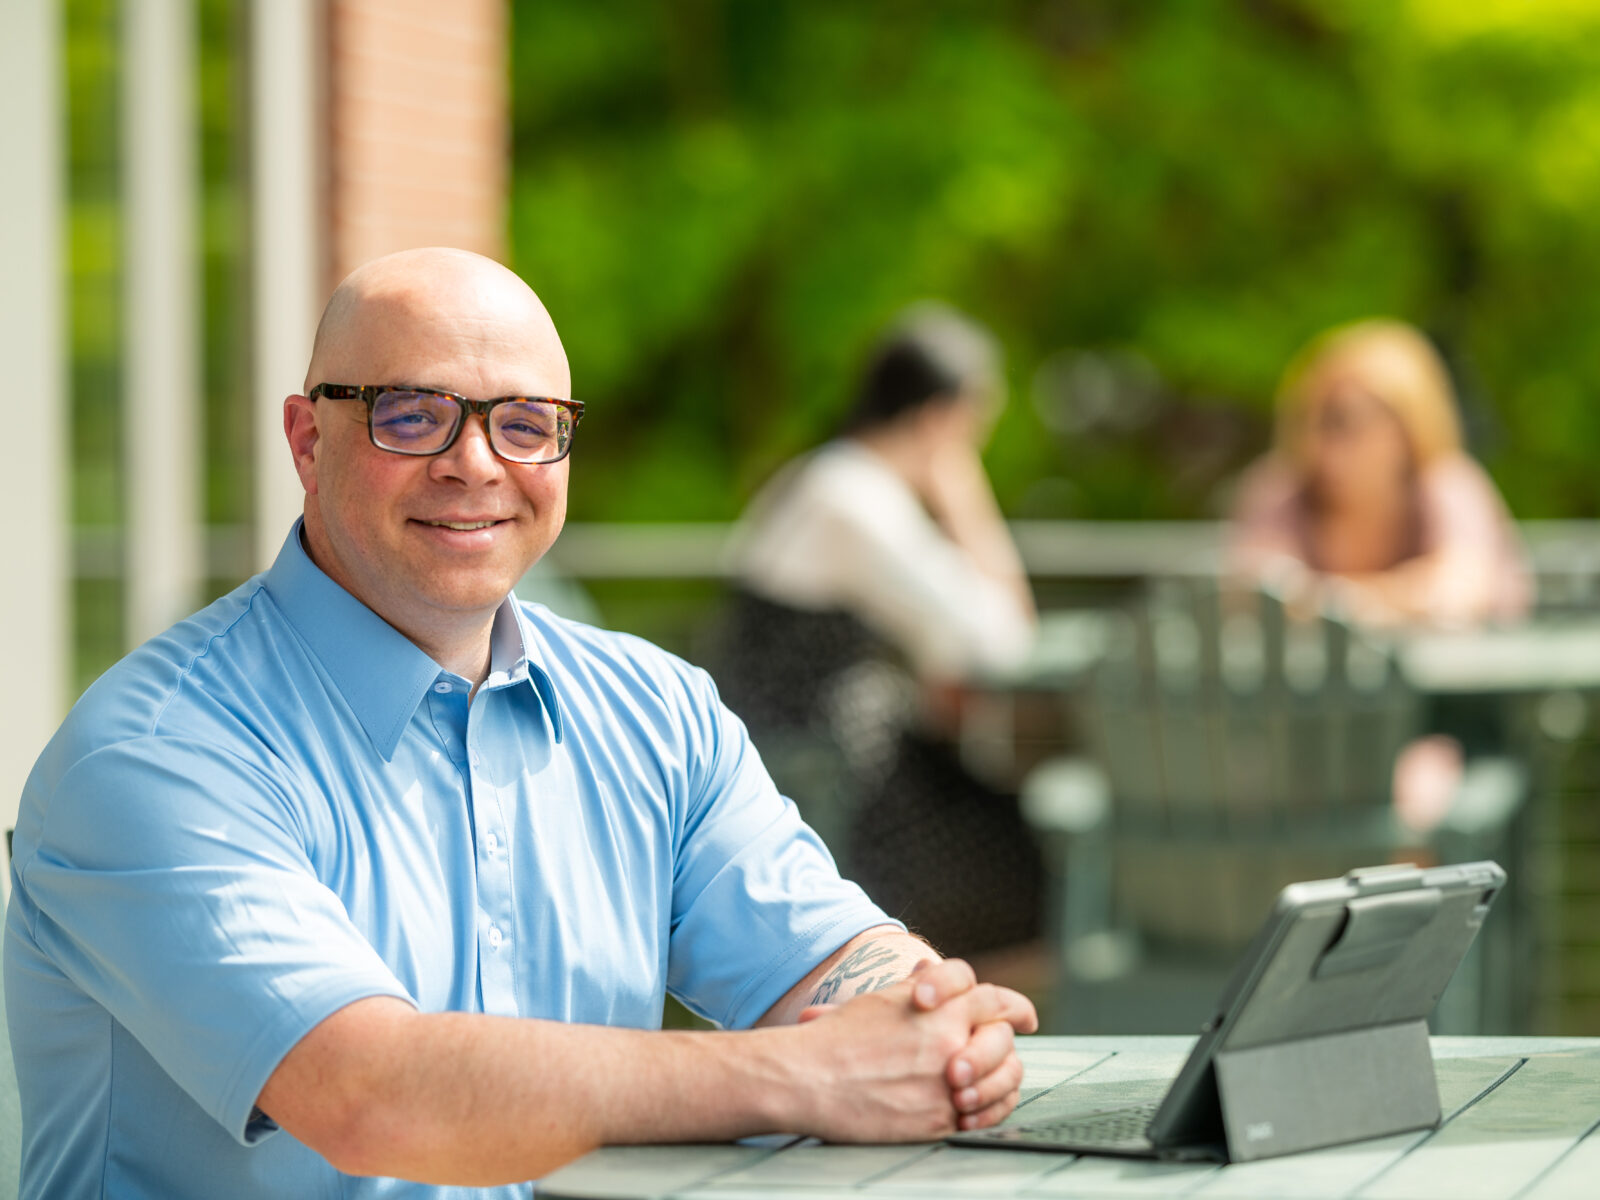 man at outdoor table using a laptop